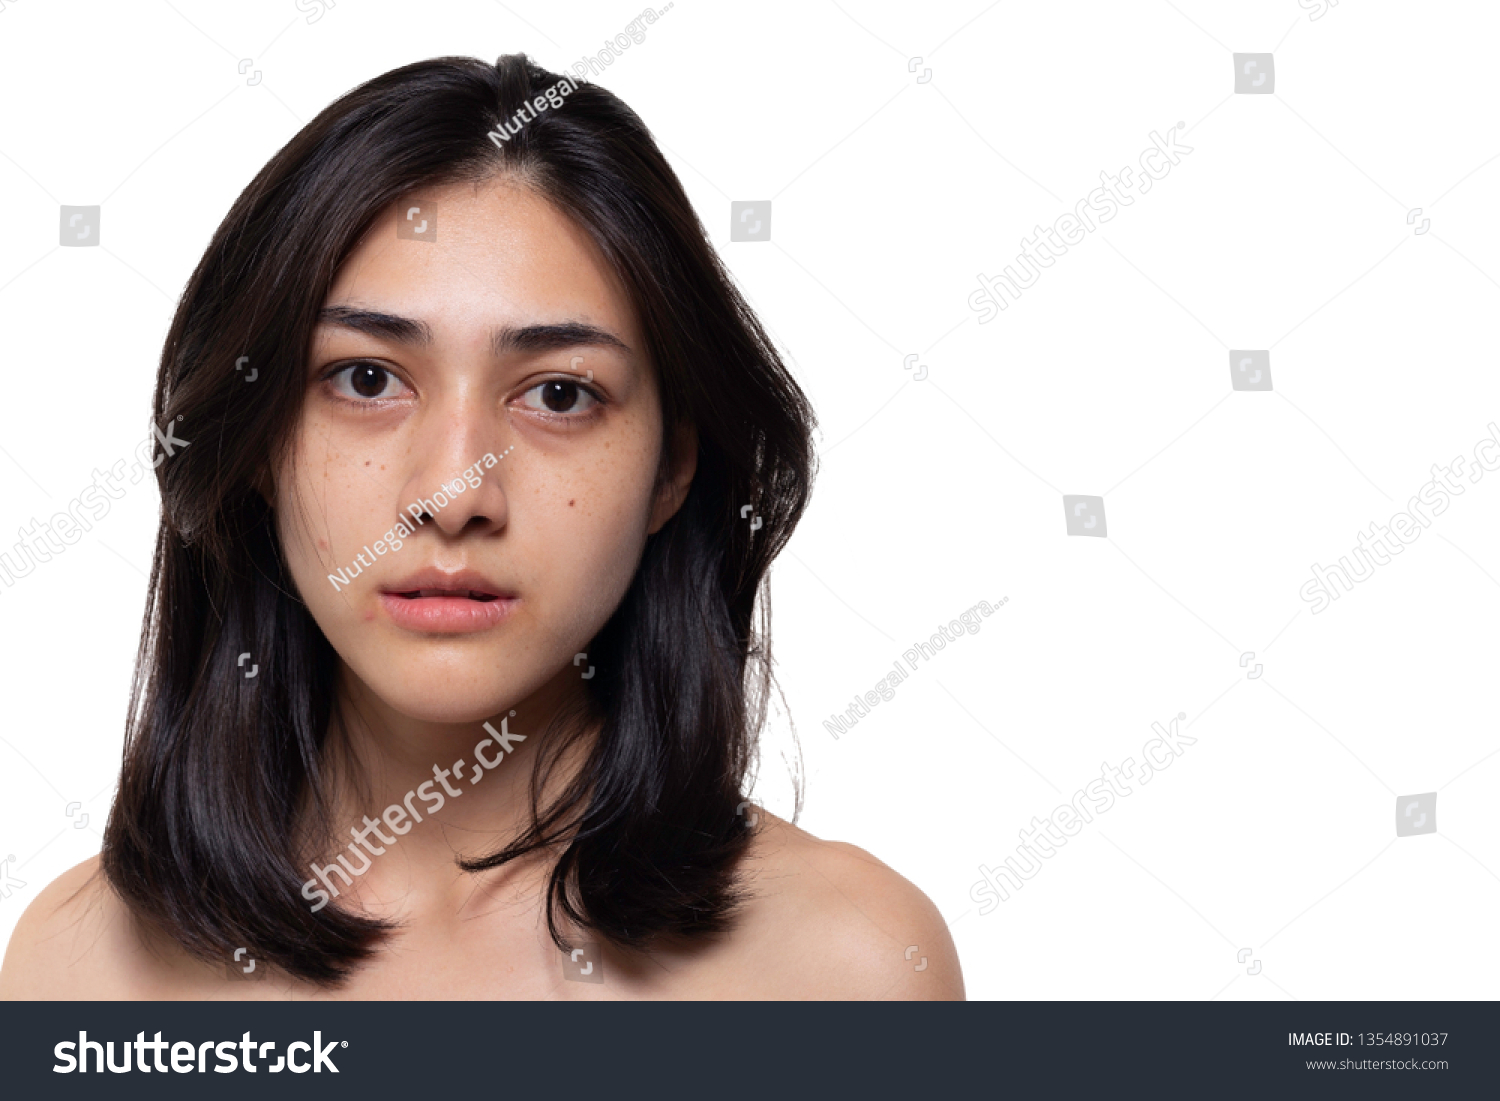 Beautiful asian woman gets freckles, blemish, pimple or acne and dull skin on her face. Charming beautiful young woman get problems of her skin. She looks unhappy. isolated on white, copy space #1354891037